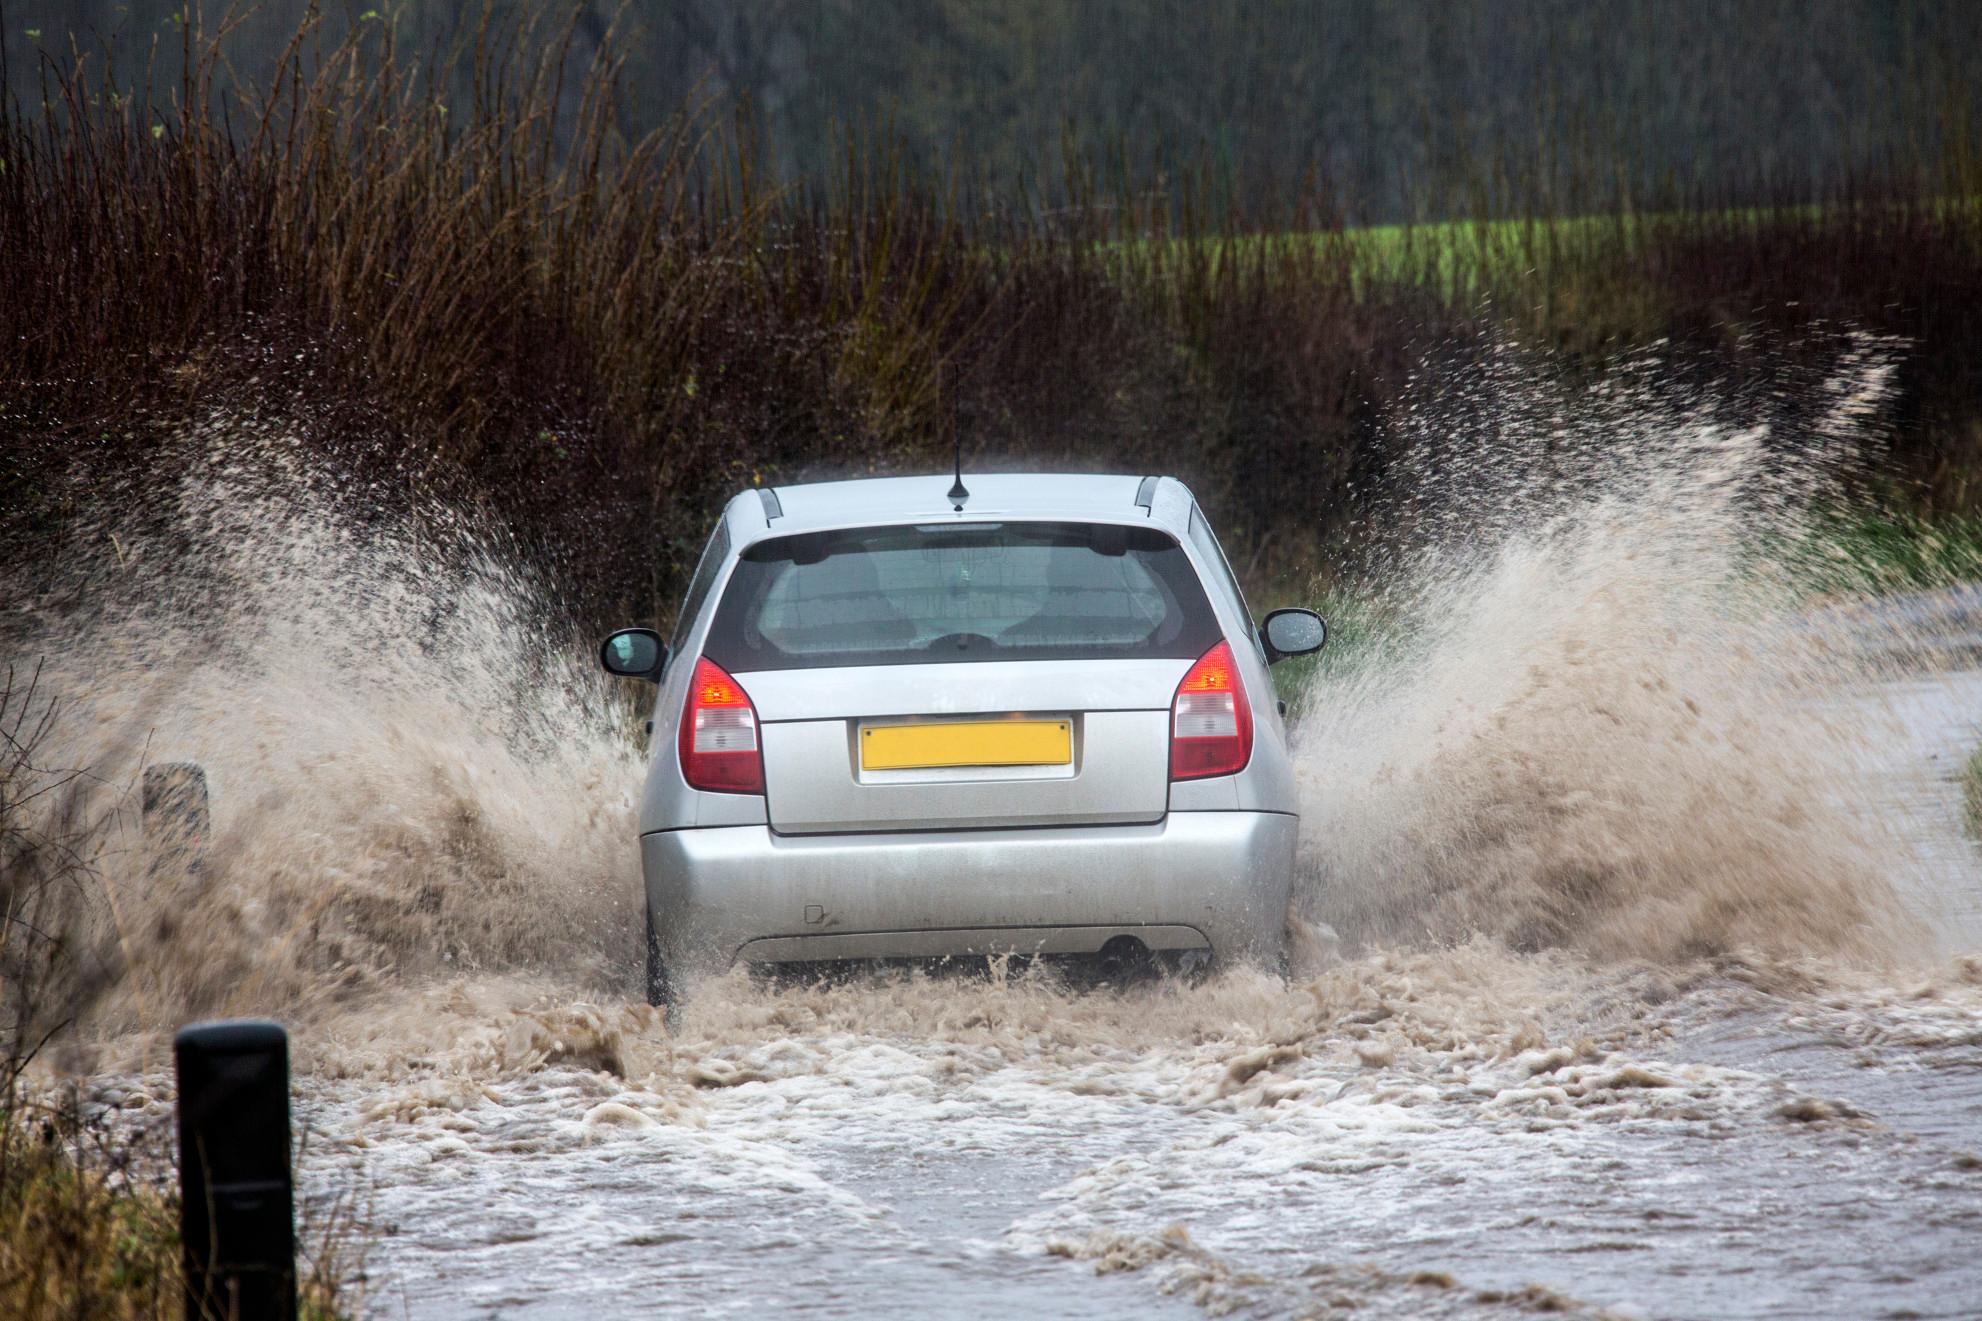 Car damage is especially common during a storm when there is severe flooding.